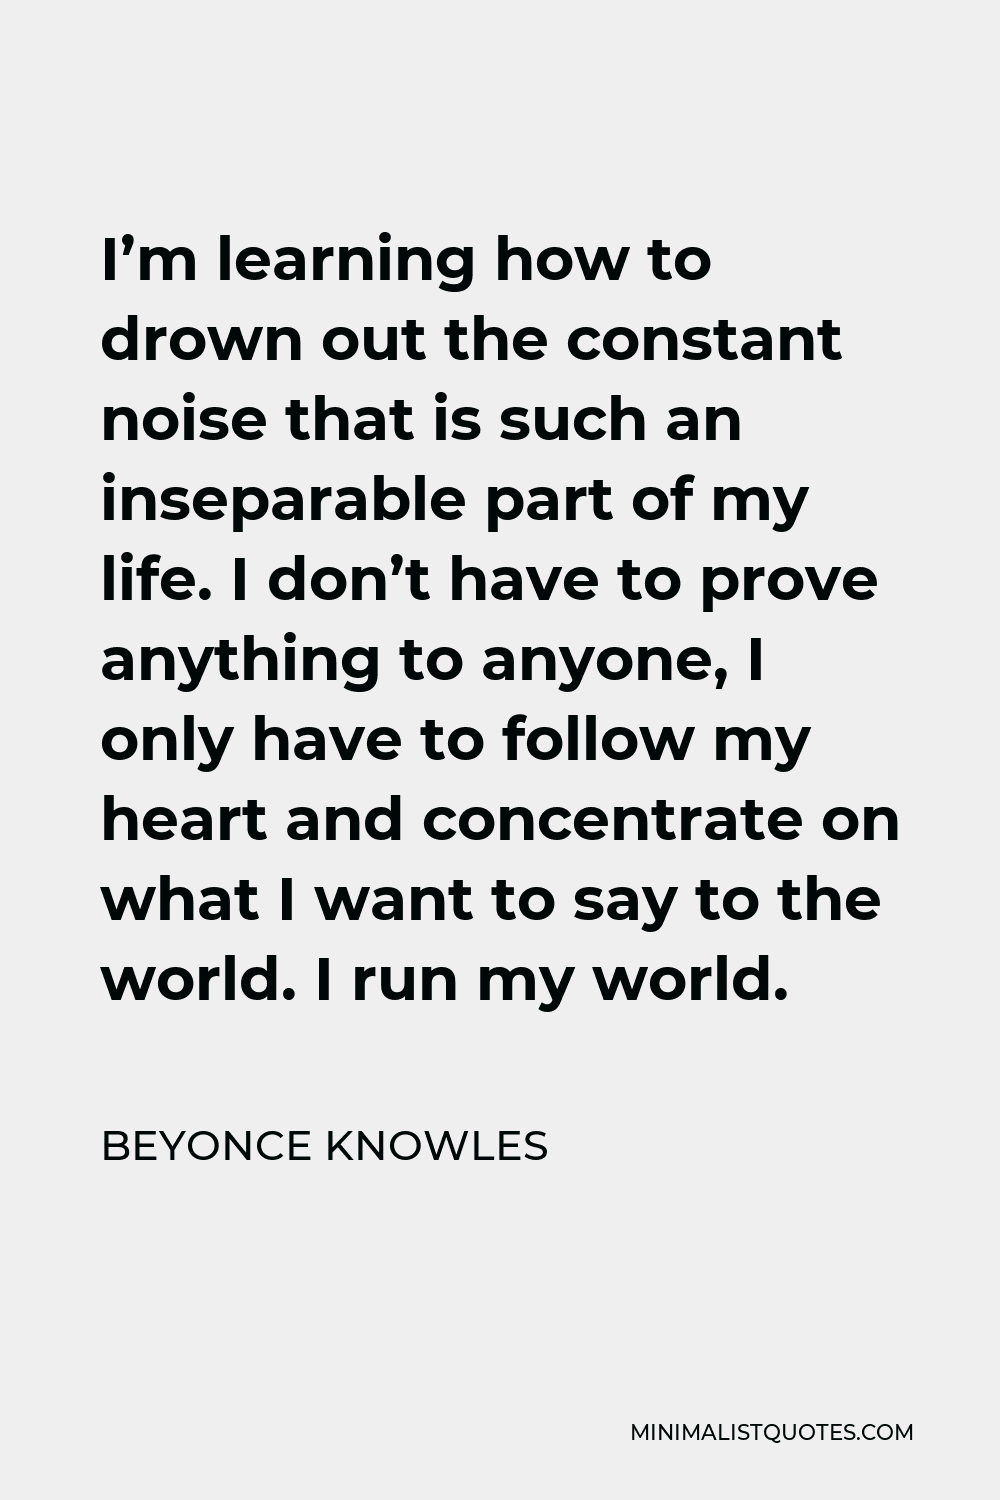 Beyonce Knowles Quote: I'm learning how to drown out the constant noise ...